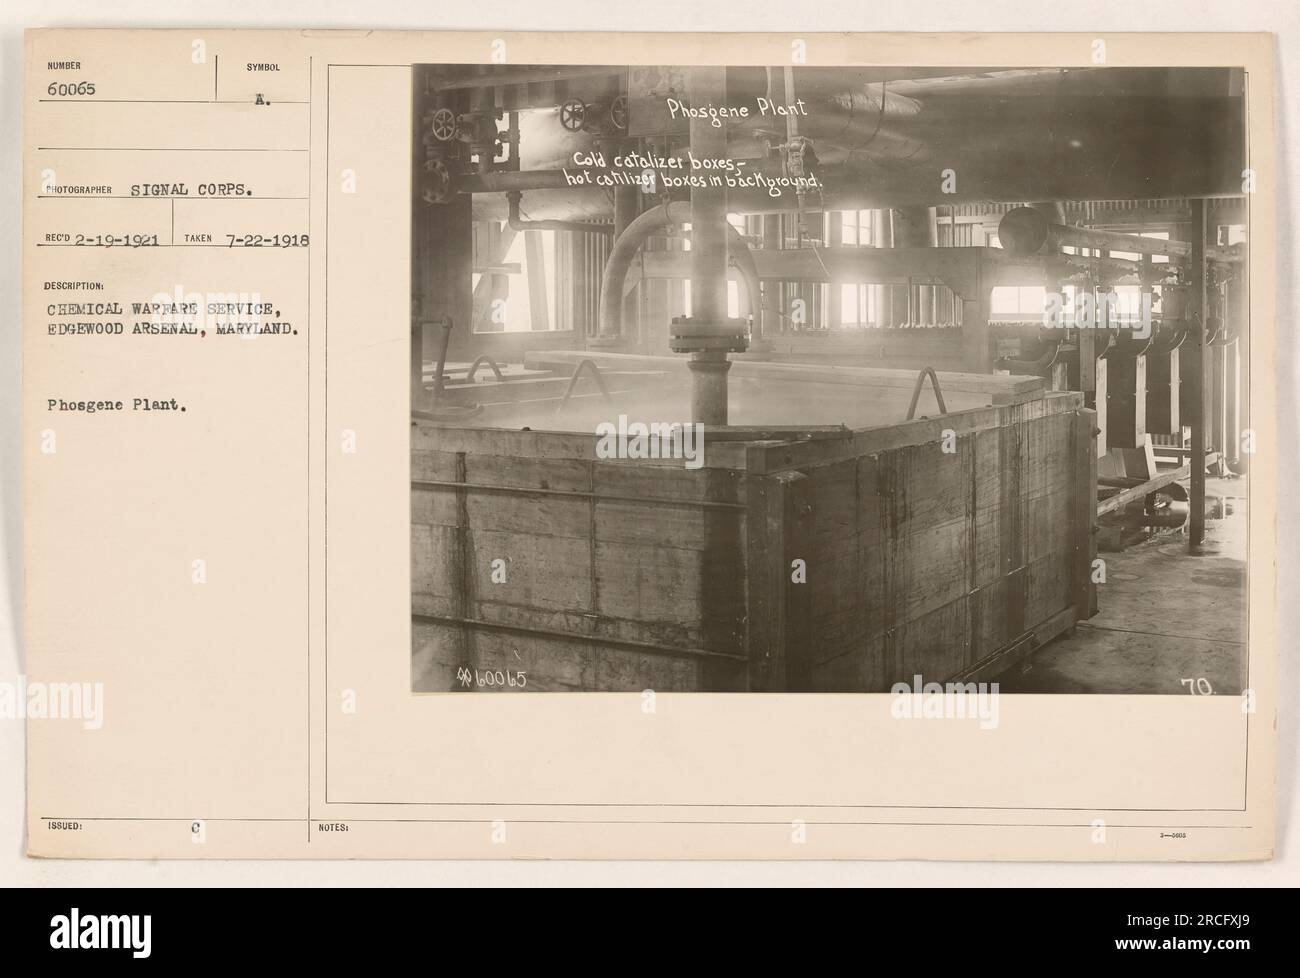 The image shows the Phosgene Plant at the Edgewood Arsenal in Maryland, operated by the Chemical Warfare Service during World War I. The photo was taken on July 22, 1918. In the foreground, cold catalyzer boxes can be seen, with hot catalyzer boxes in the background. Stock Photo